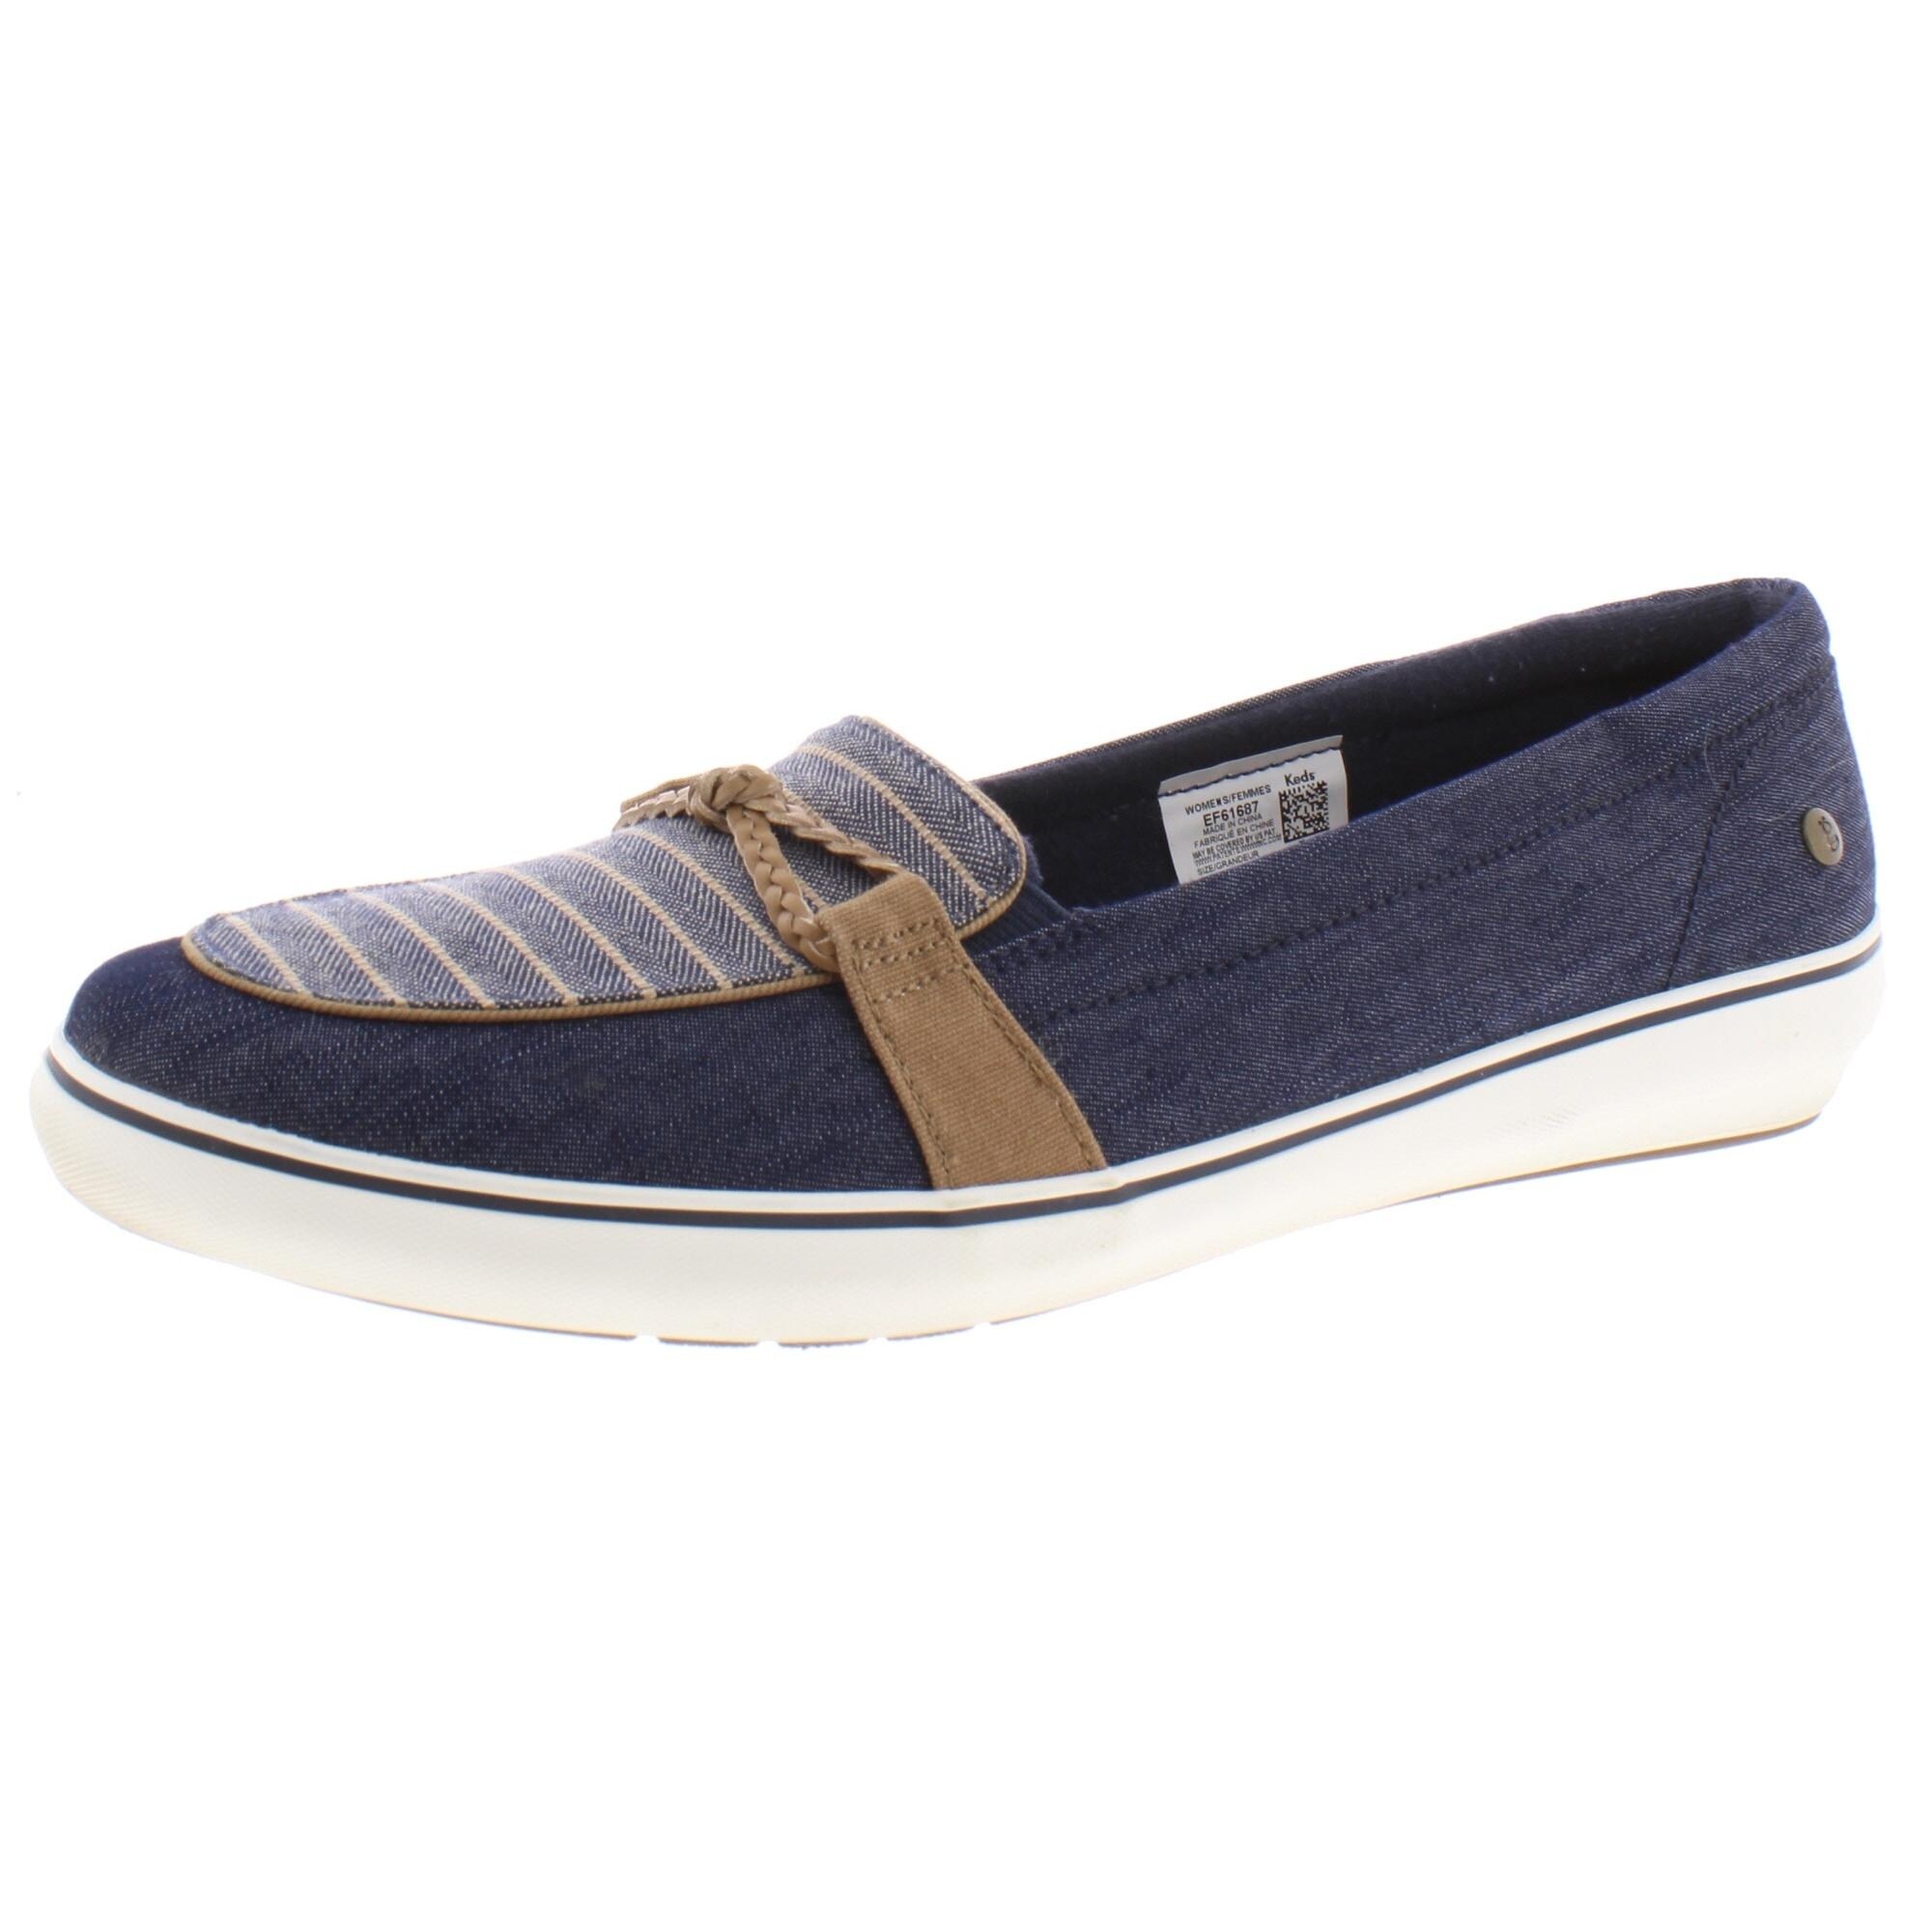 ked boat shoes